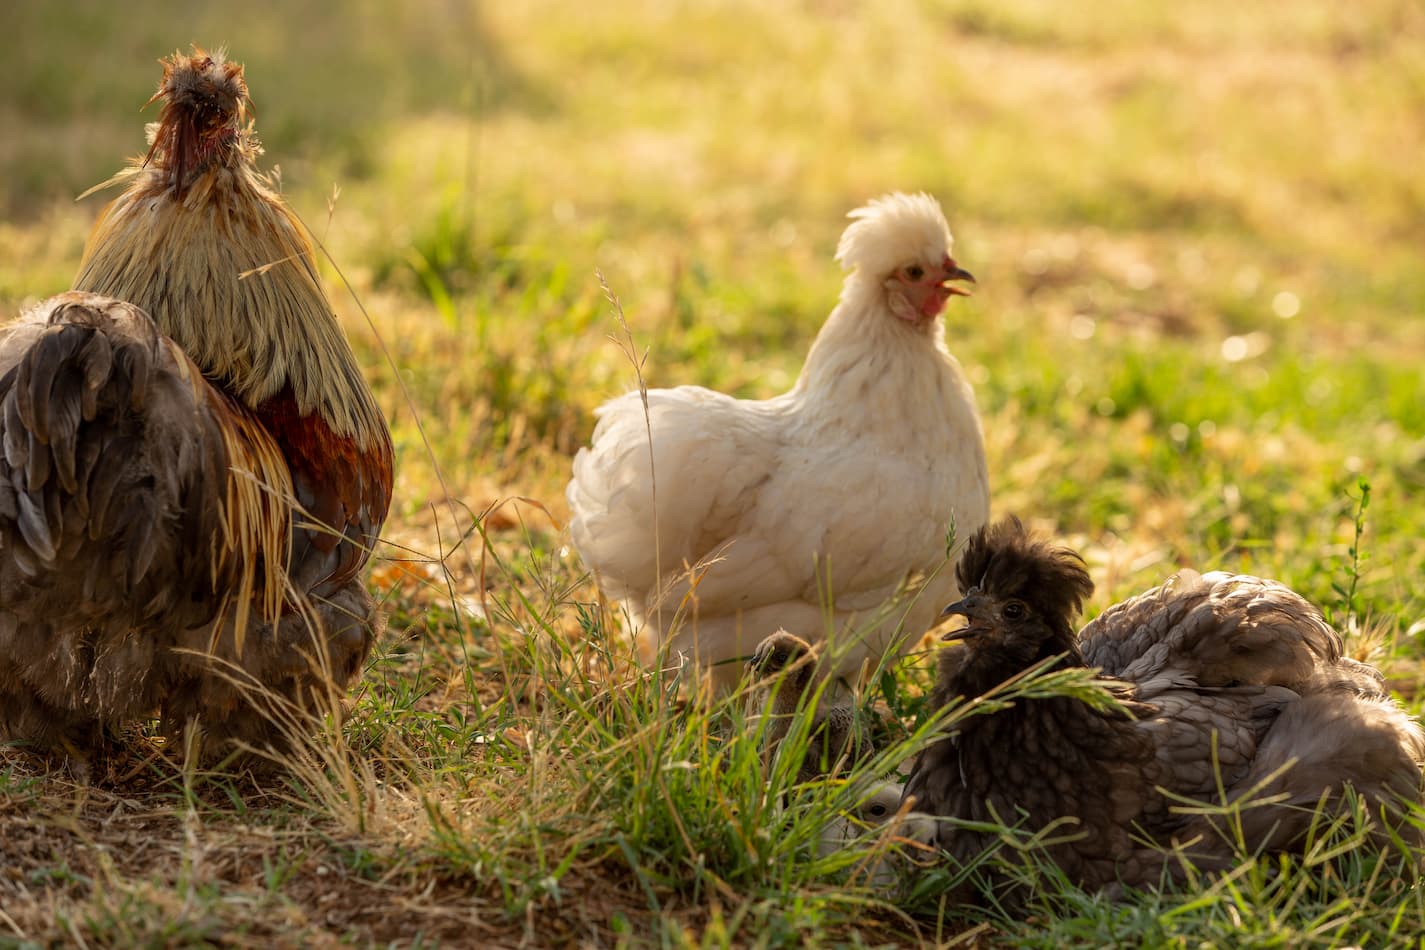 An image of chickens outside with their chicks